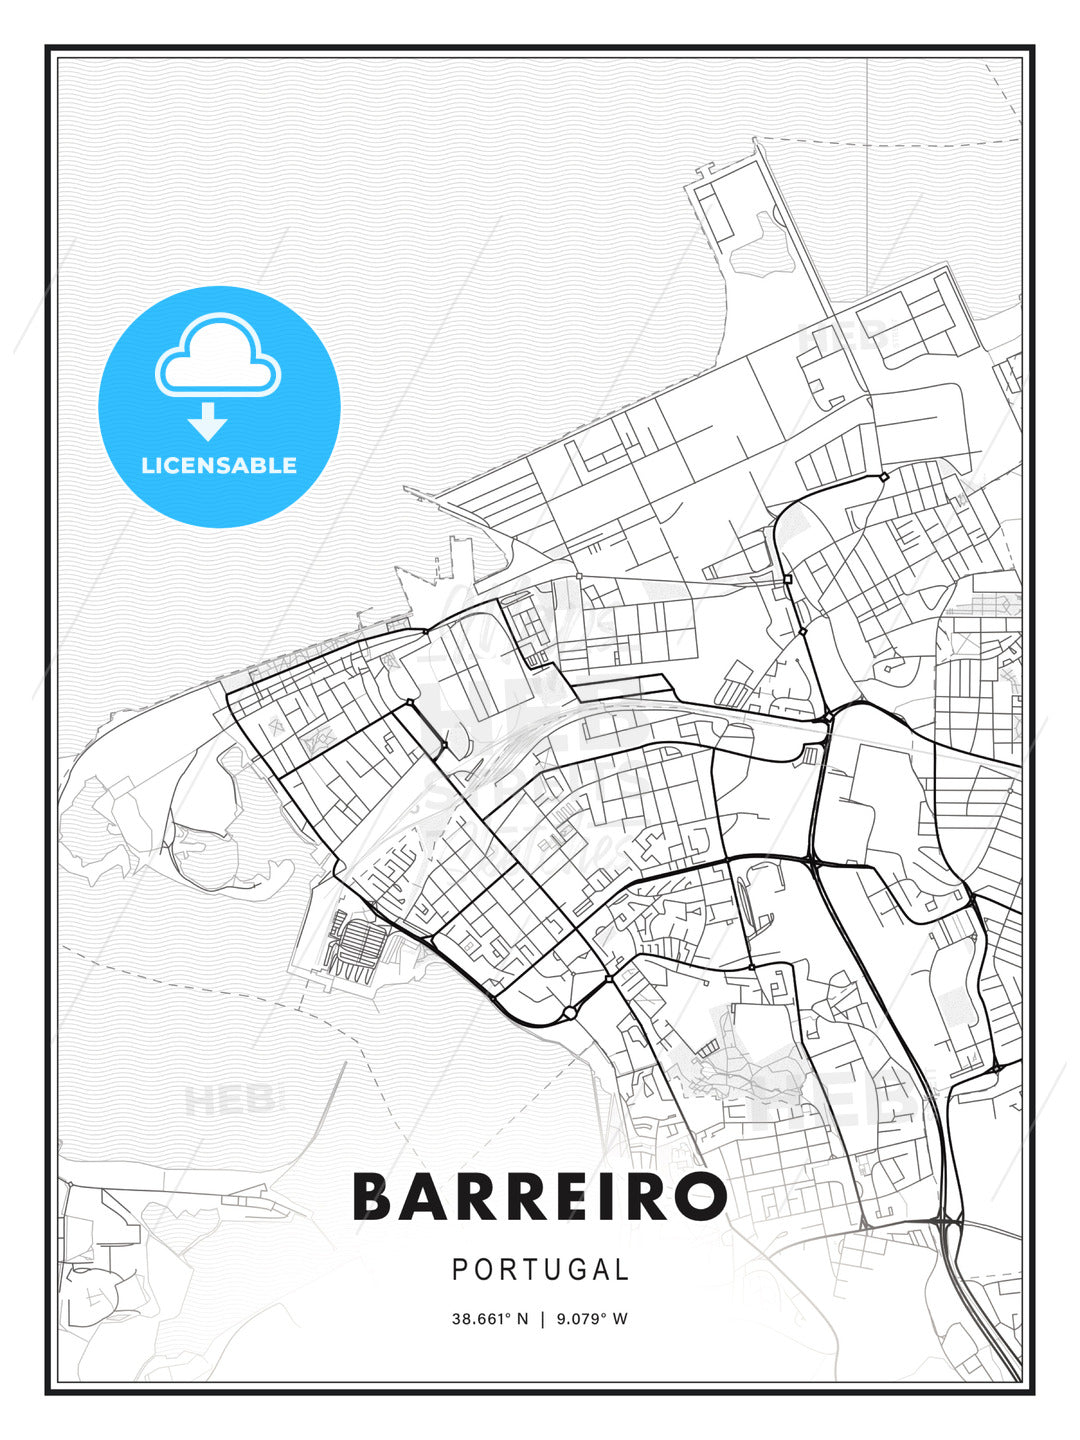 Barreiro, Portugal, Modern Print Template in Various Formats - HEBSTREITS Sketches